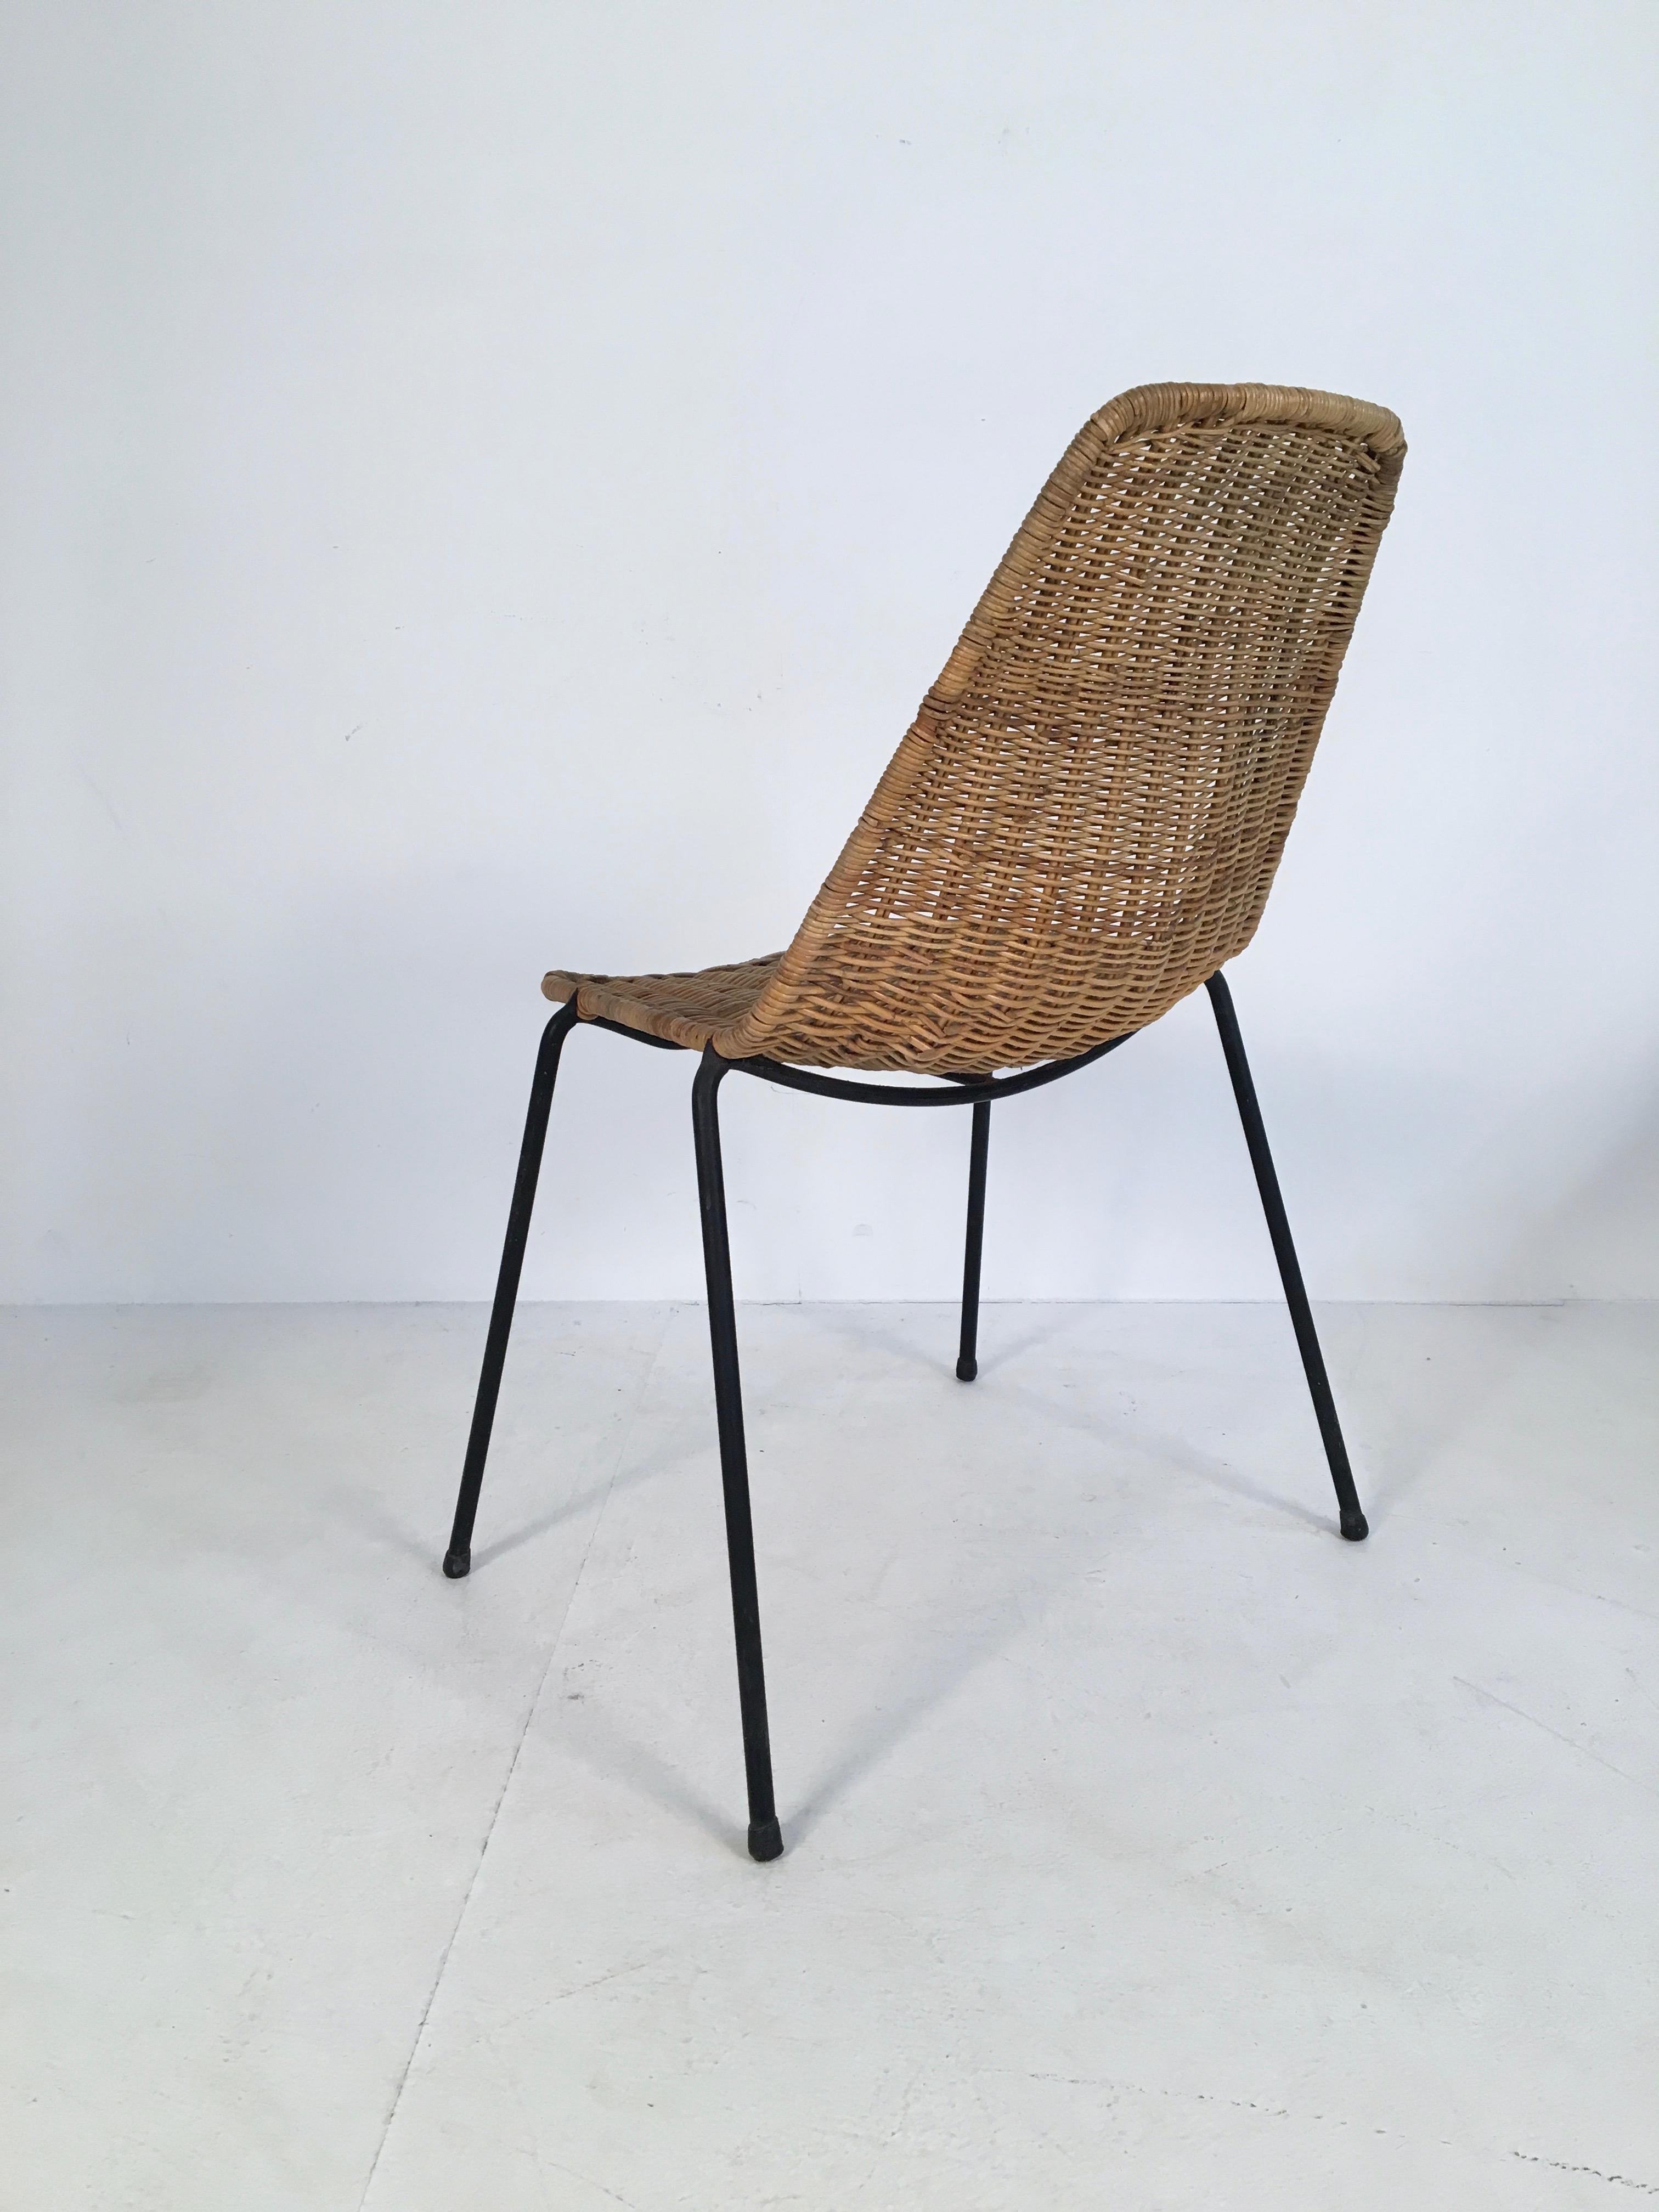 2 Midcentury Wicker Chairs by Campo & Graffi for Home Torino, Italy, circa 1950 In Good Condition For Sale In London, GB